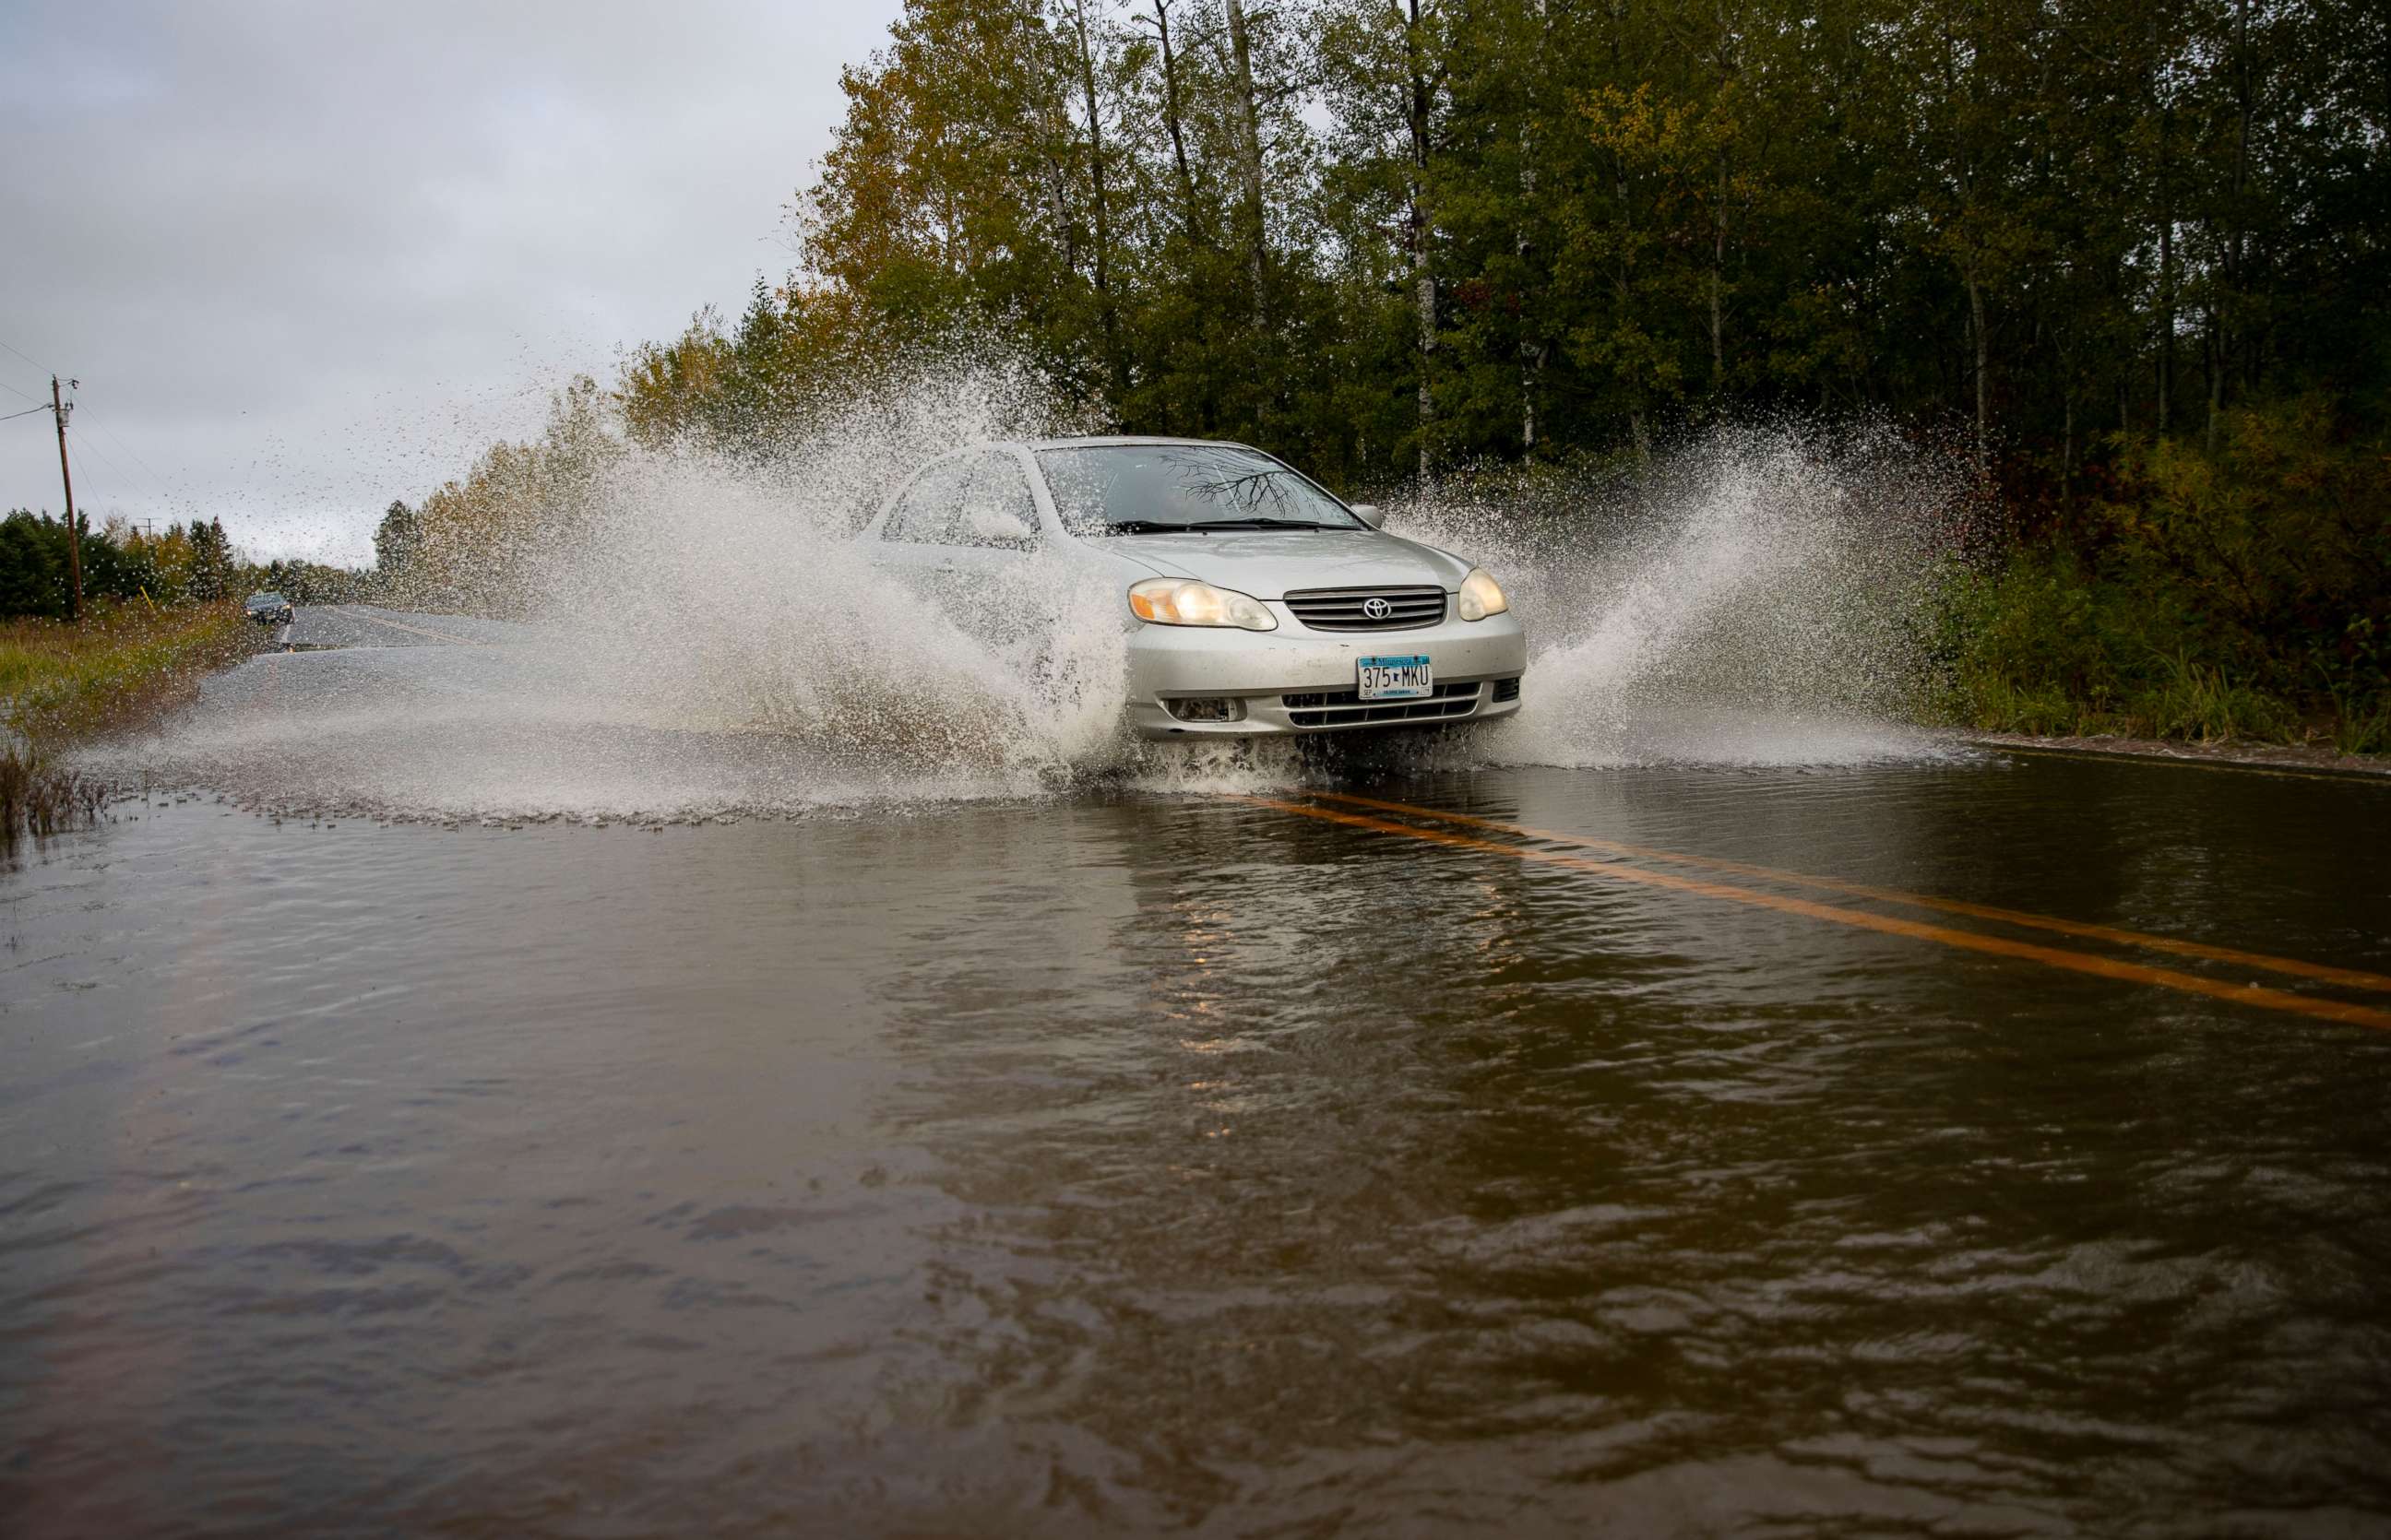 PHOTO: A car passes through high water in a section of County Highway K in South Range, Wis, Monday, Sept. 30, 2019. The road was washed out and eventually closed off on Monday morning due to heavy rain that started Sunday night.